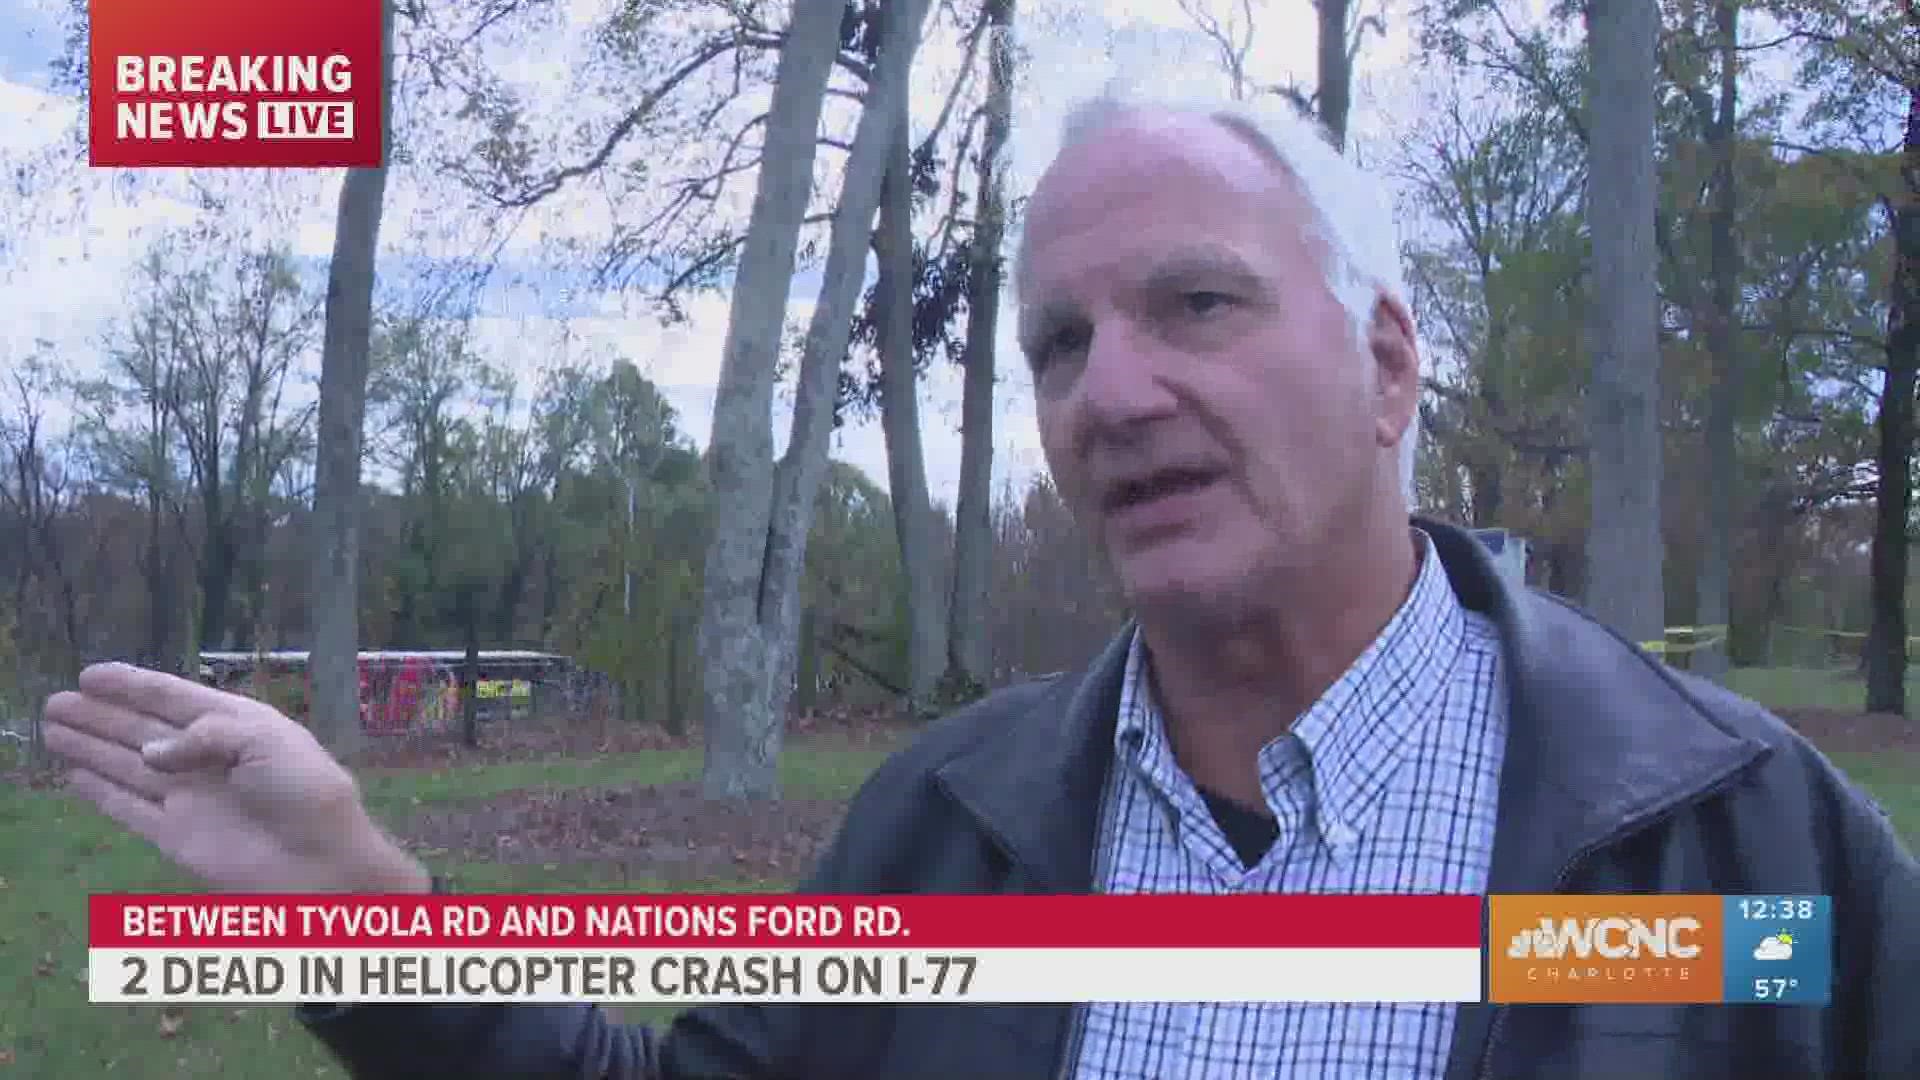 Two people were killed in a helicopter crash along I-77 in south Charlotte Tuesday afternoon.